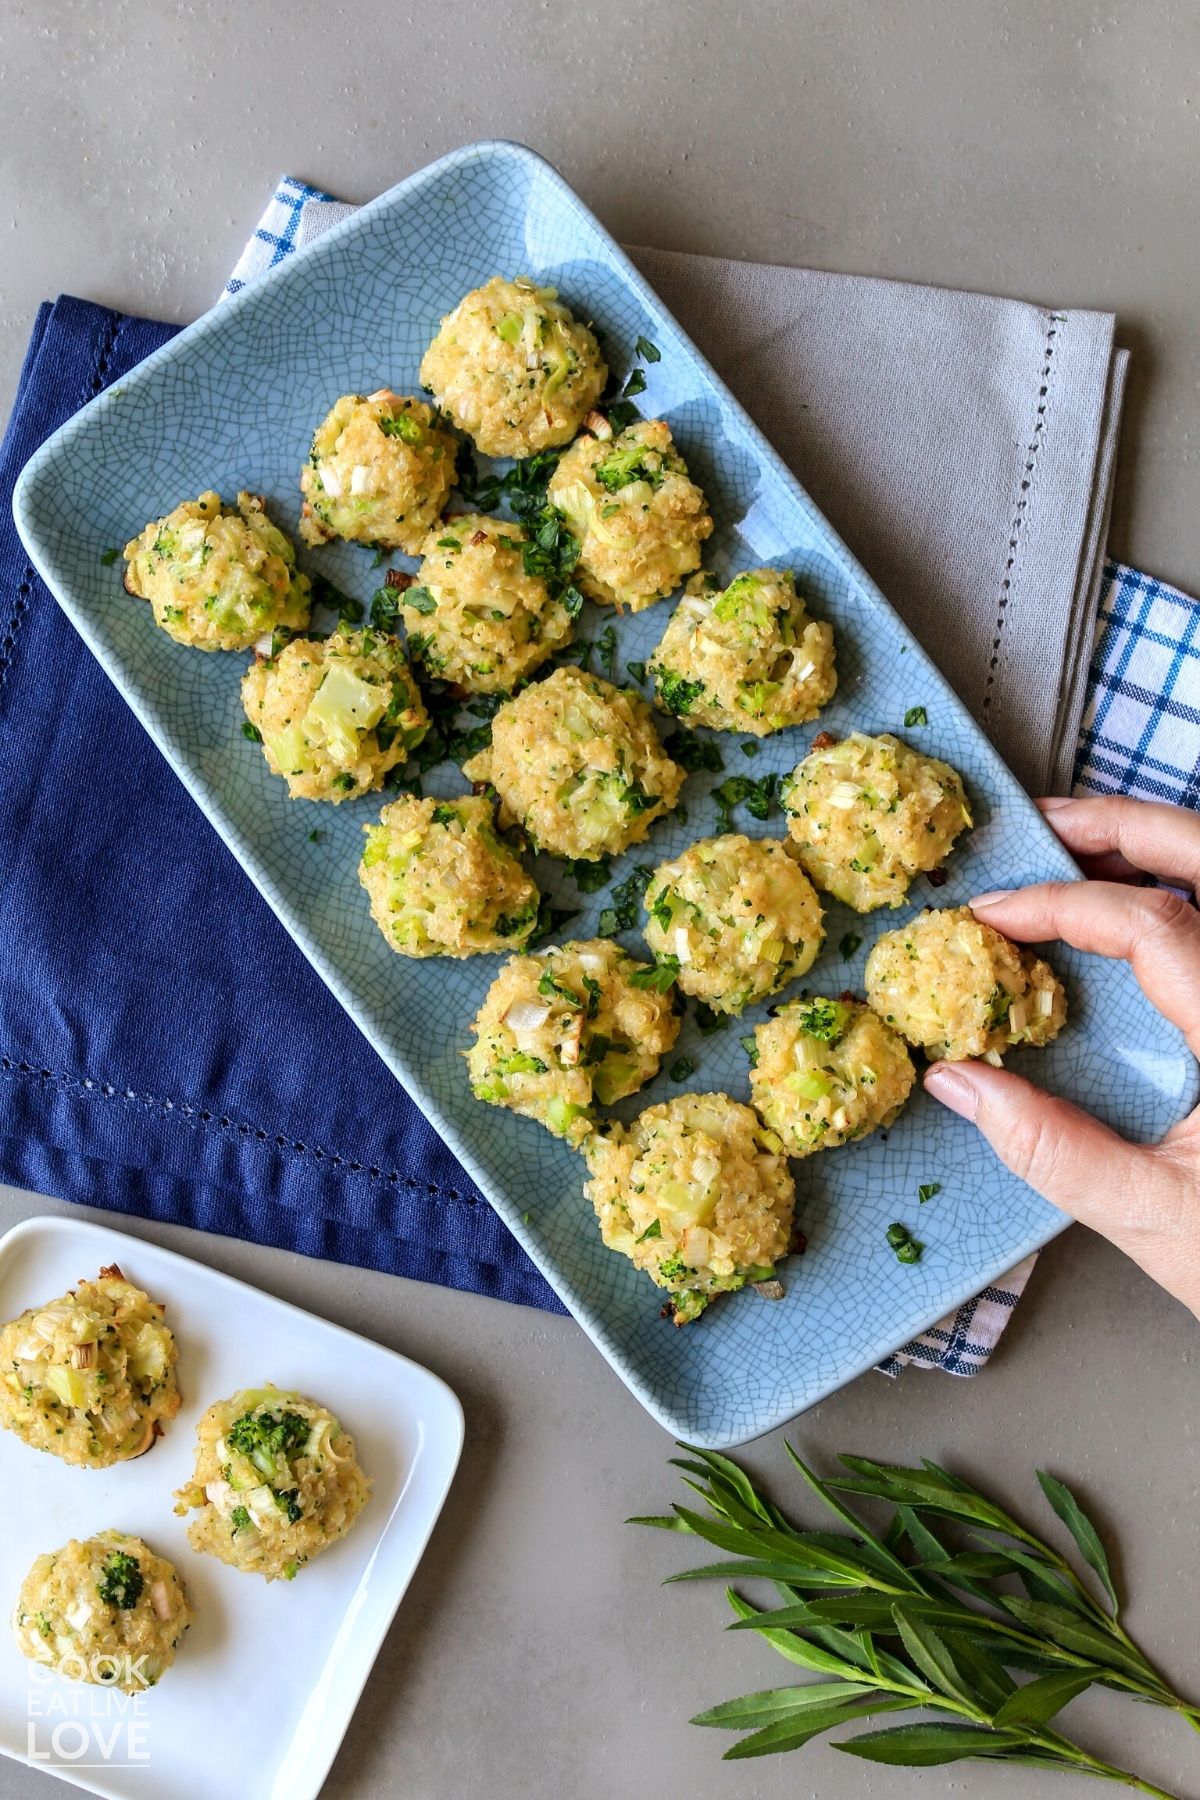 Broccoli quinoa bites on a platter with hand reaching to grab one.